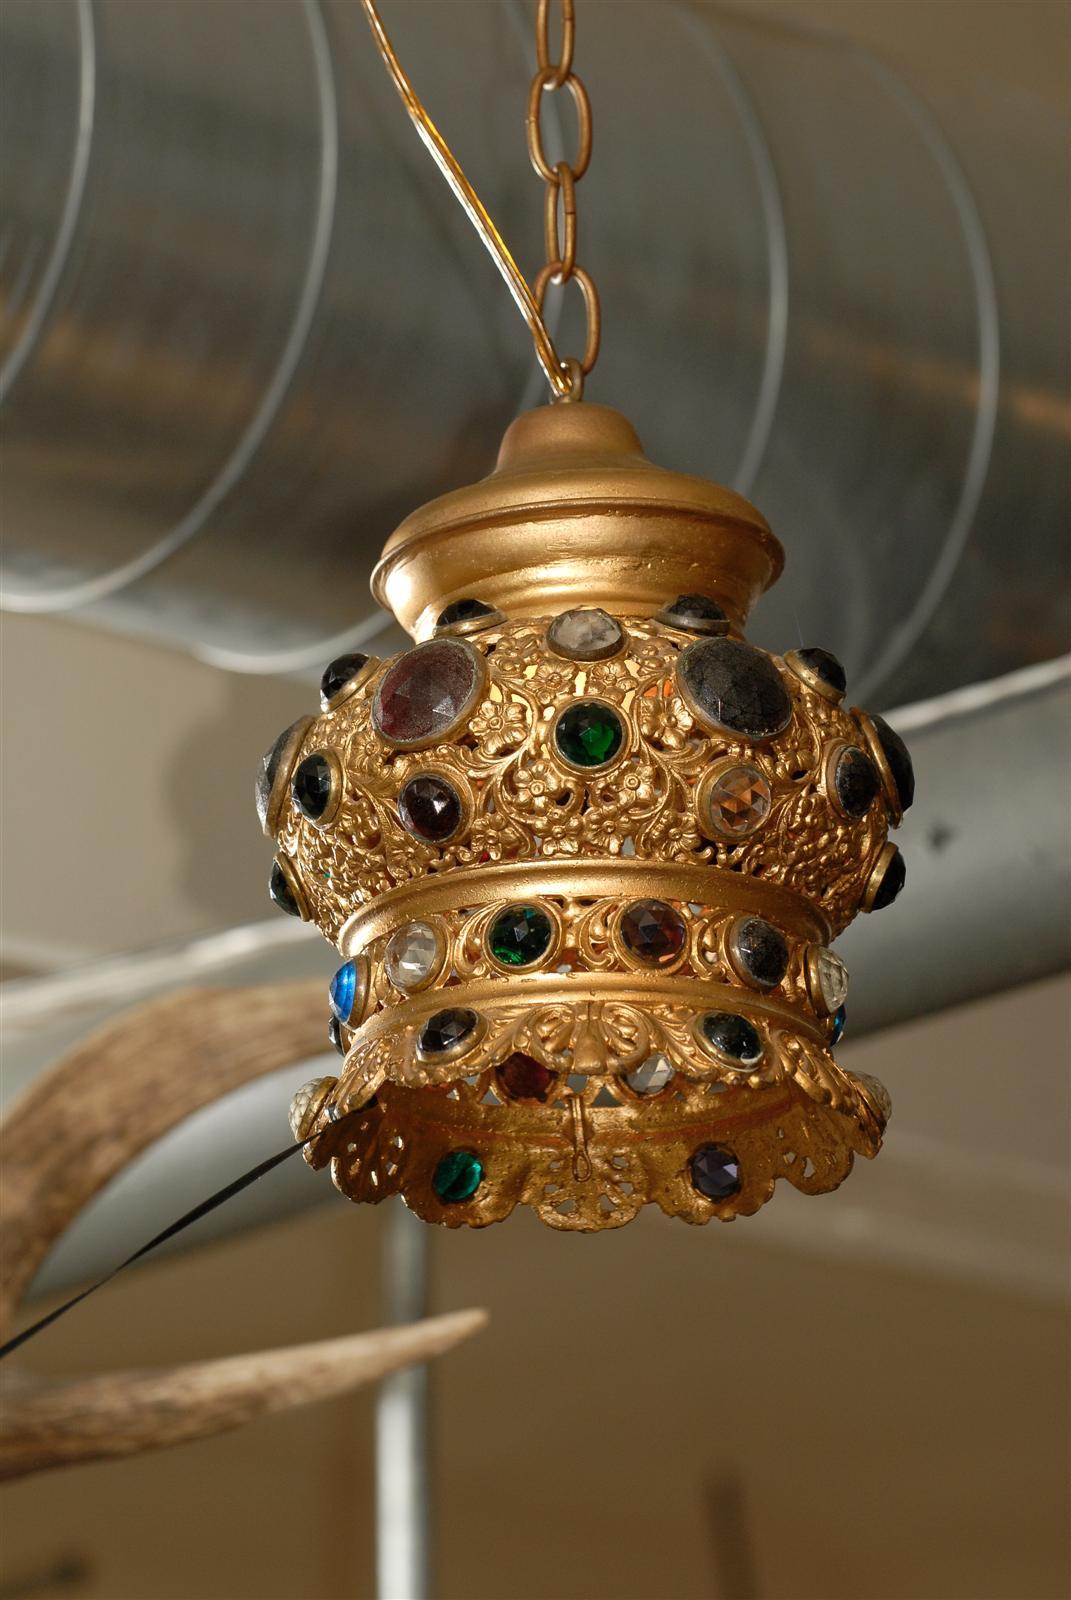 Italian gilt metal lantern with floral pierced decorations and in the shape of a crown, inset with circular, faceted gemstones.